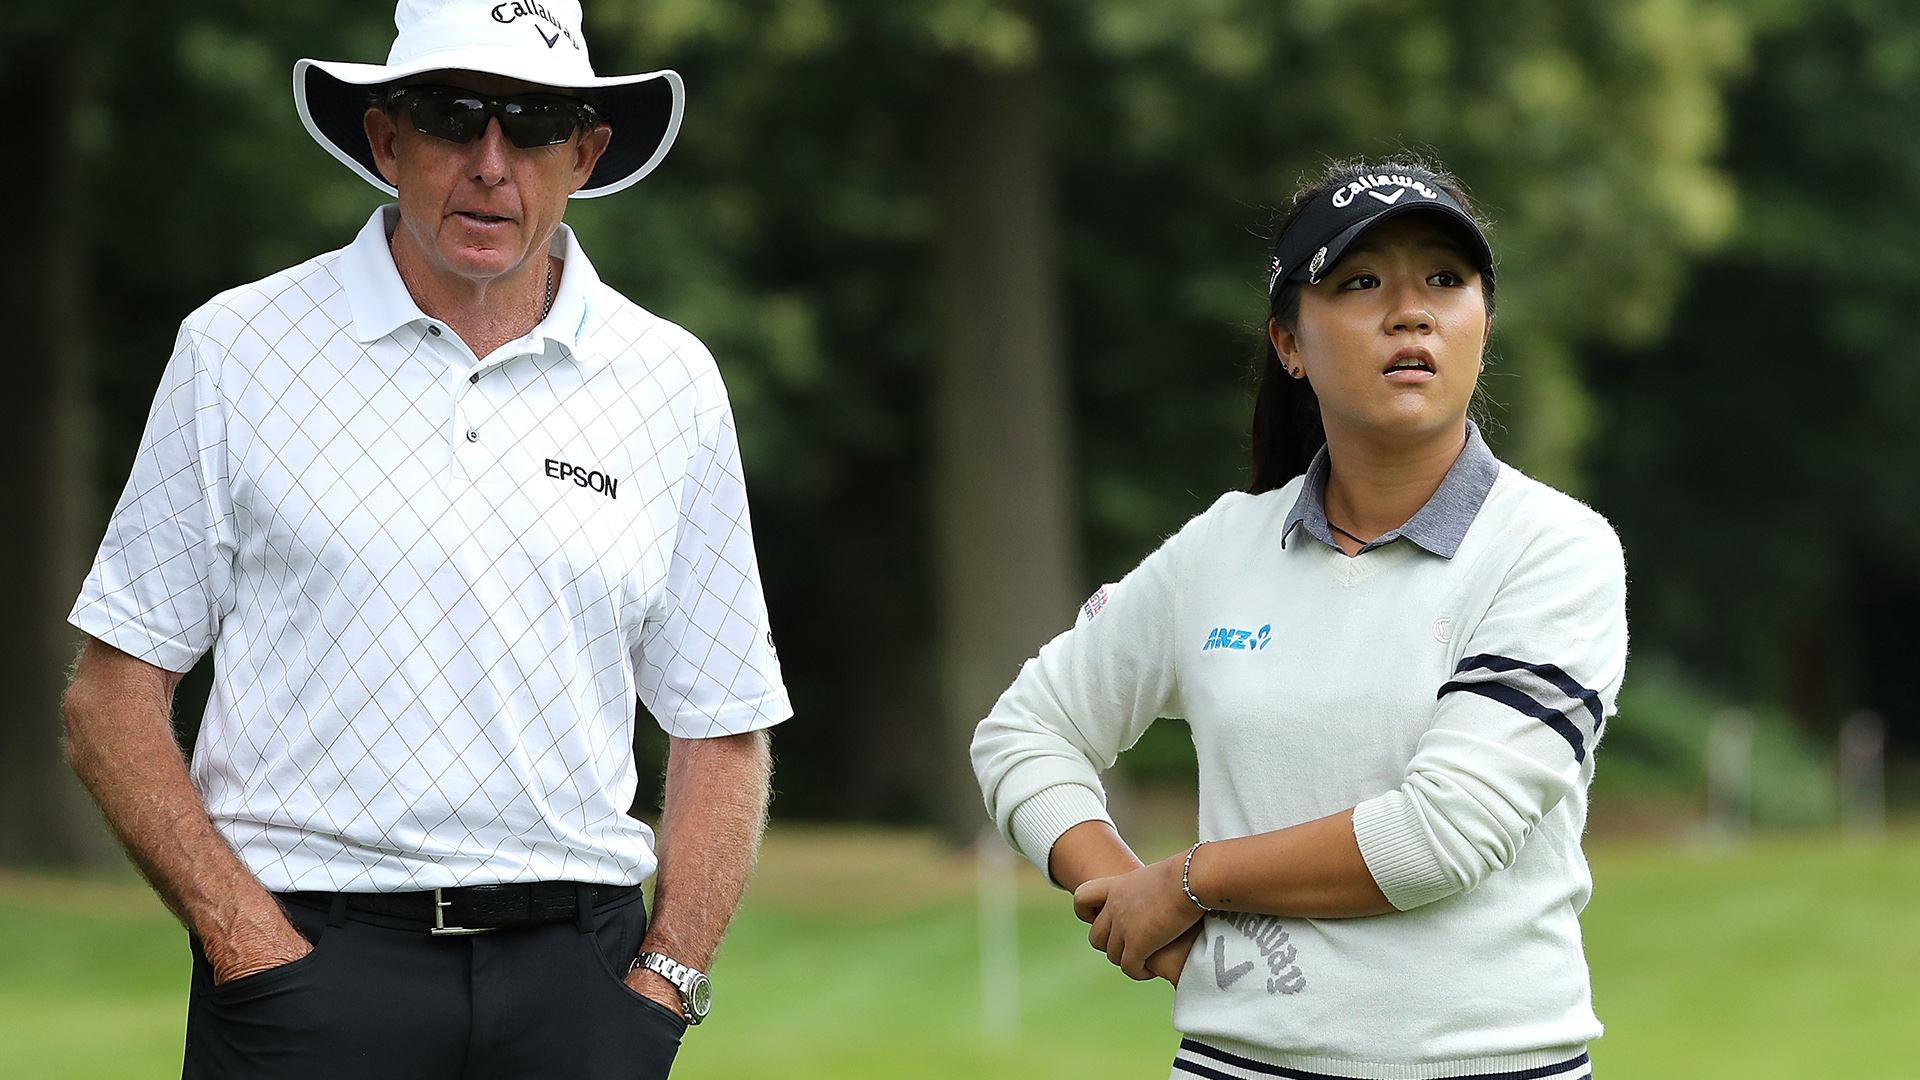 Leadbetter: Lydia Ko's father, a non-accomplished golfer, heard swing rumours